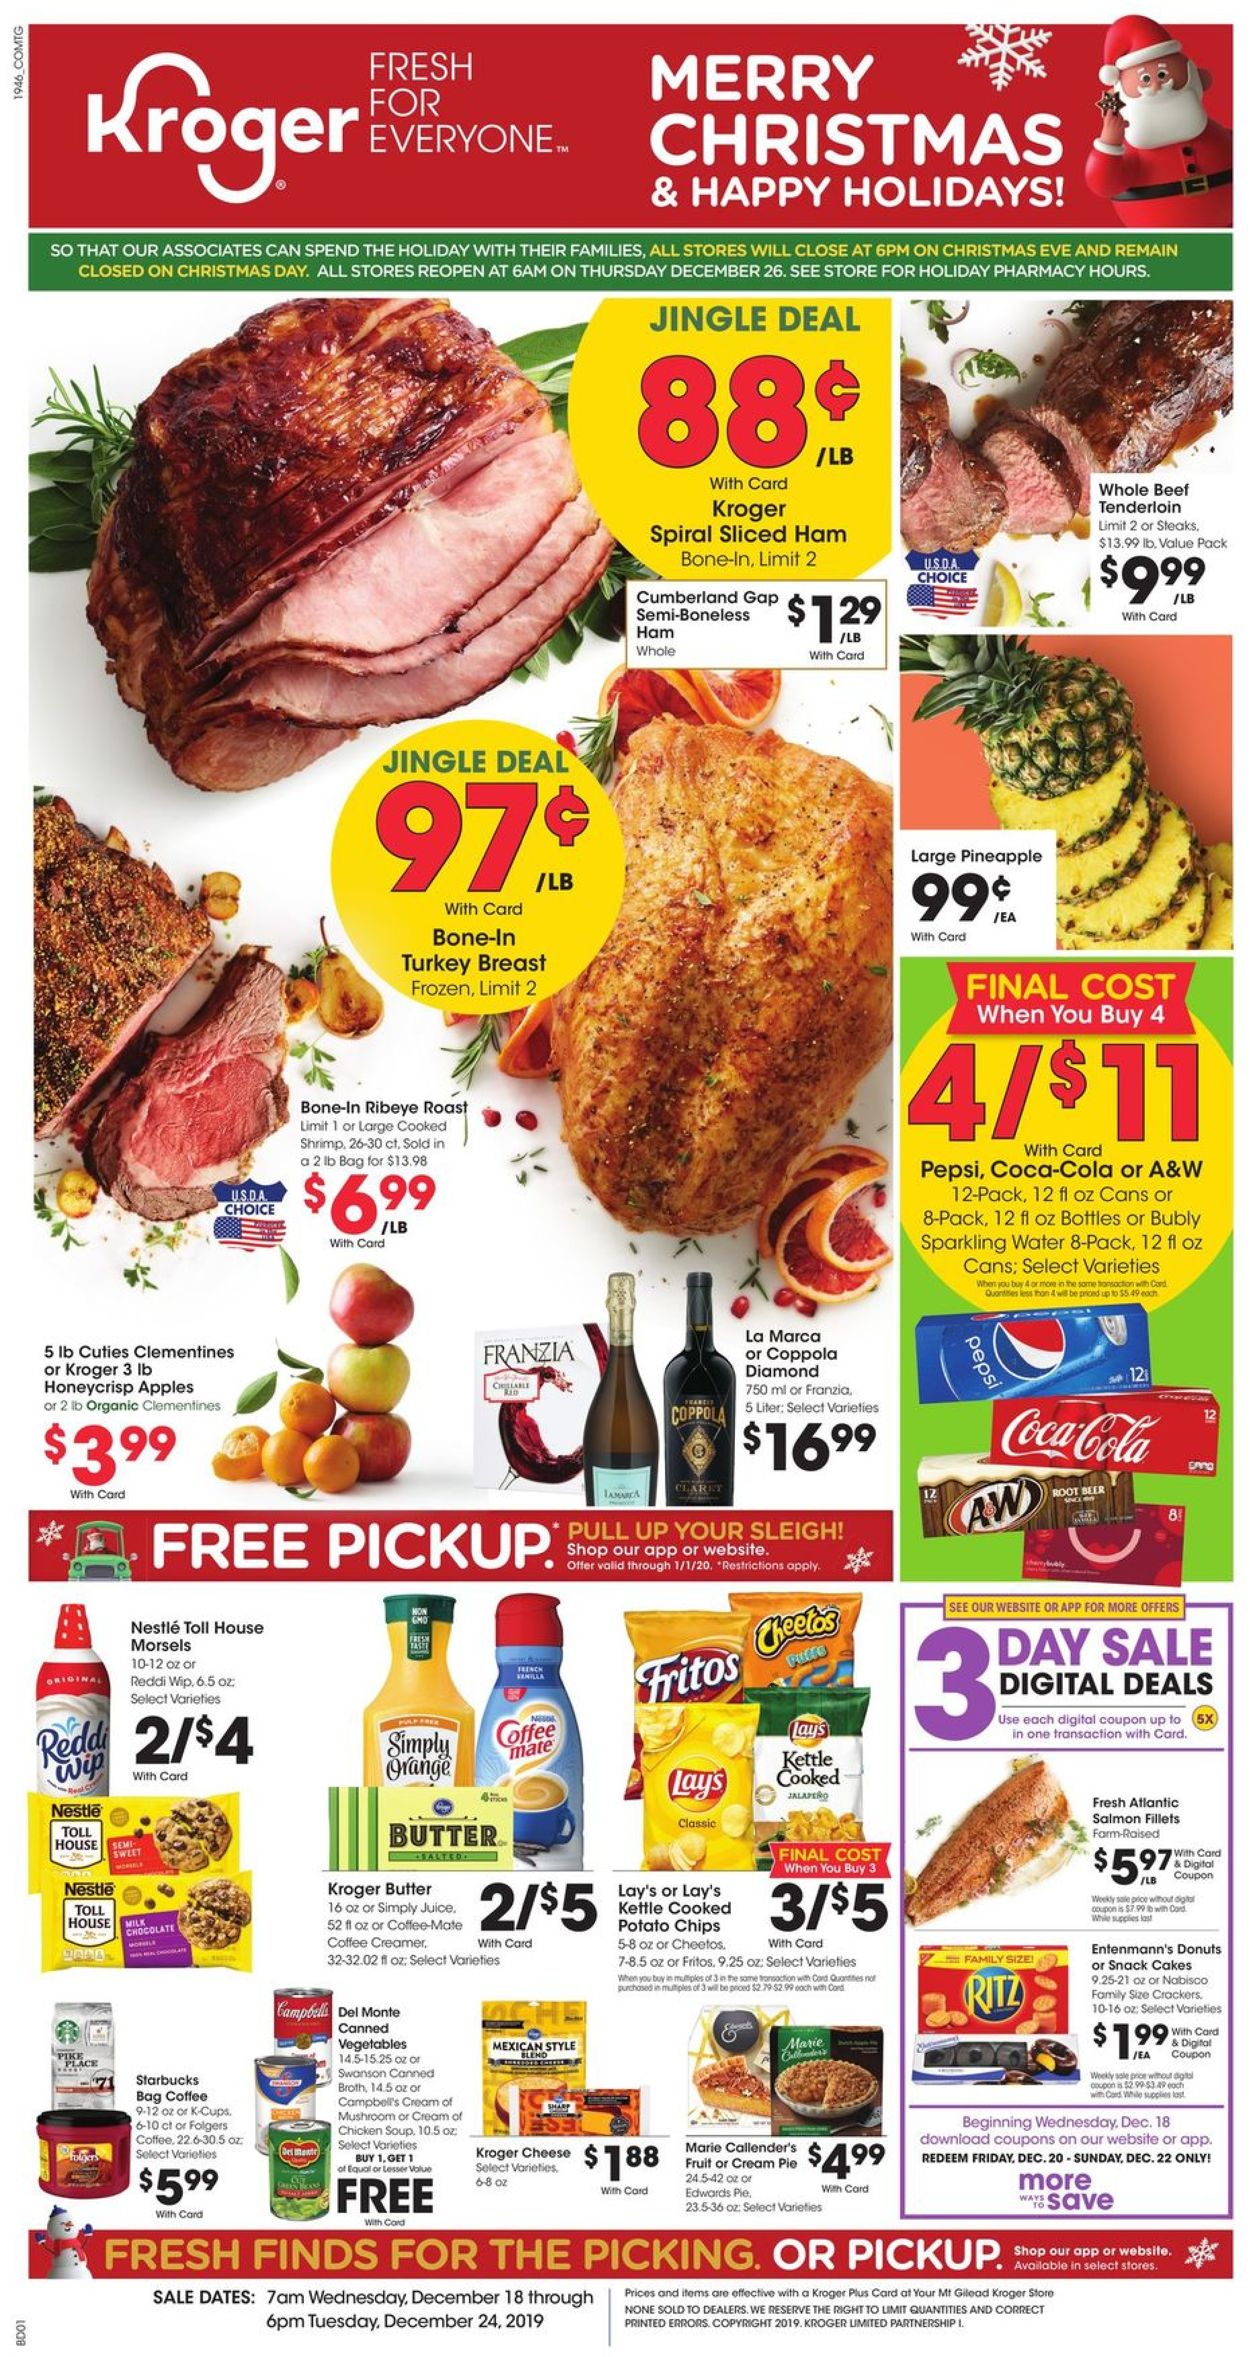 Kroger - Christmas Ad 2019 Current weekly ad 12/18 - 12/24 ...